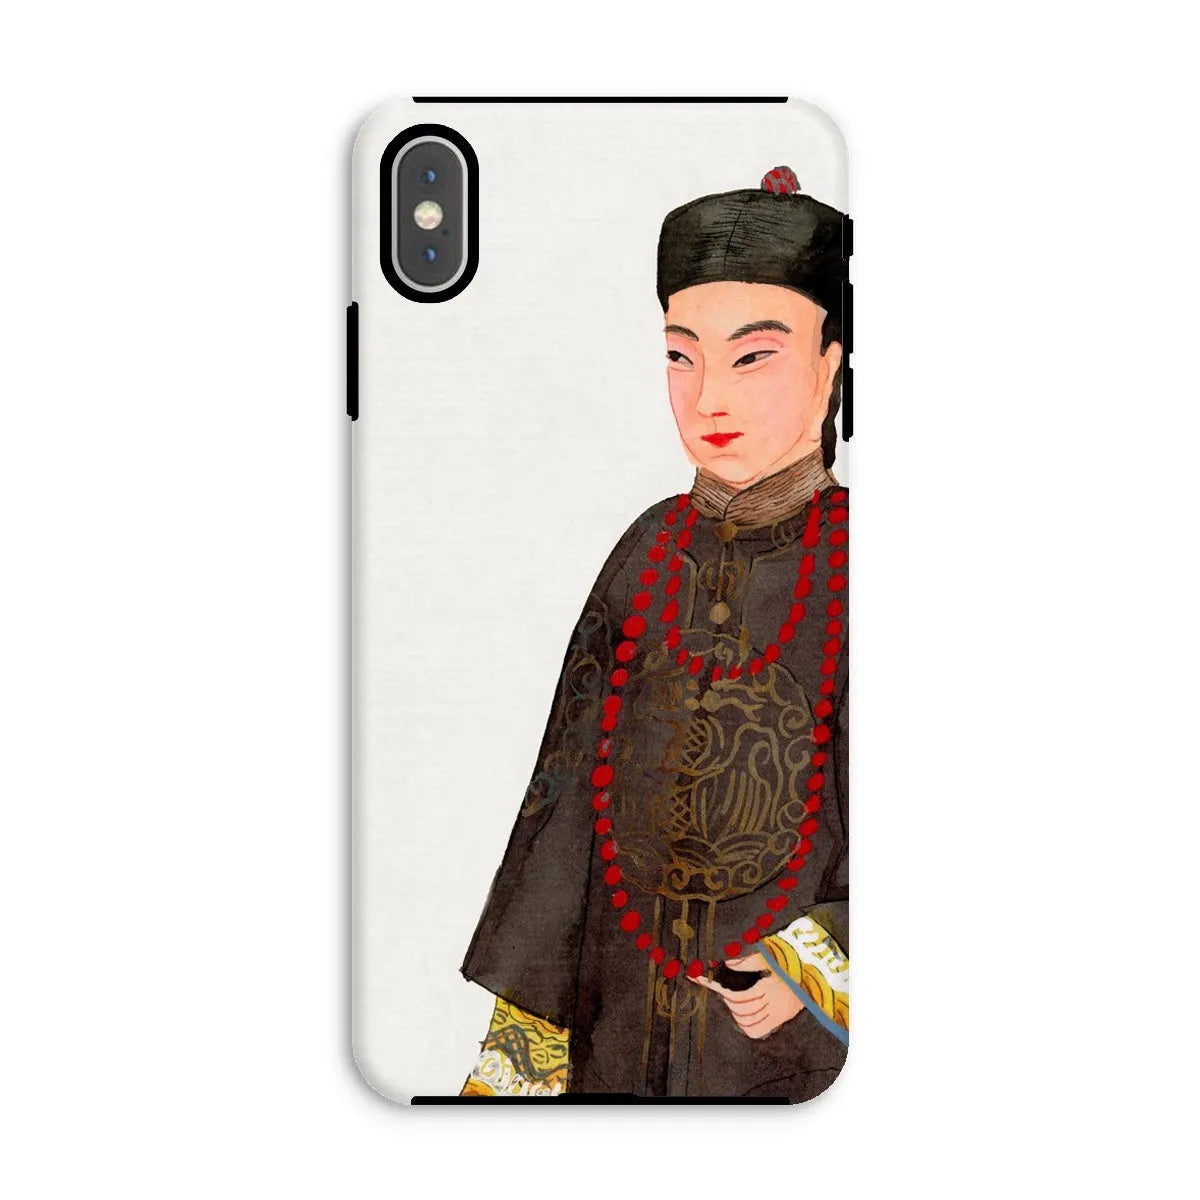 Emperor’s Courtier - Chinese Manchu Aesthetic Art Phone Case - Iphone Xs Max / Matte - Mobile Phone Cases - Aesthetic